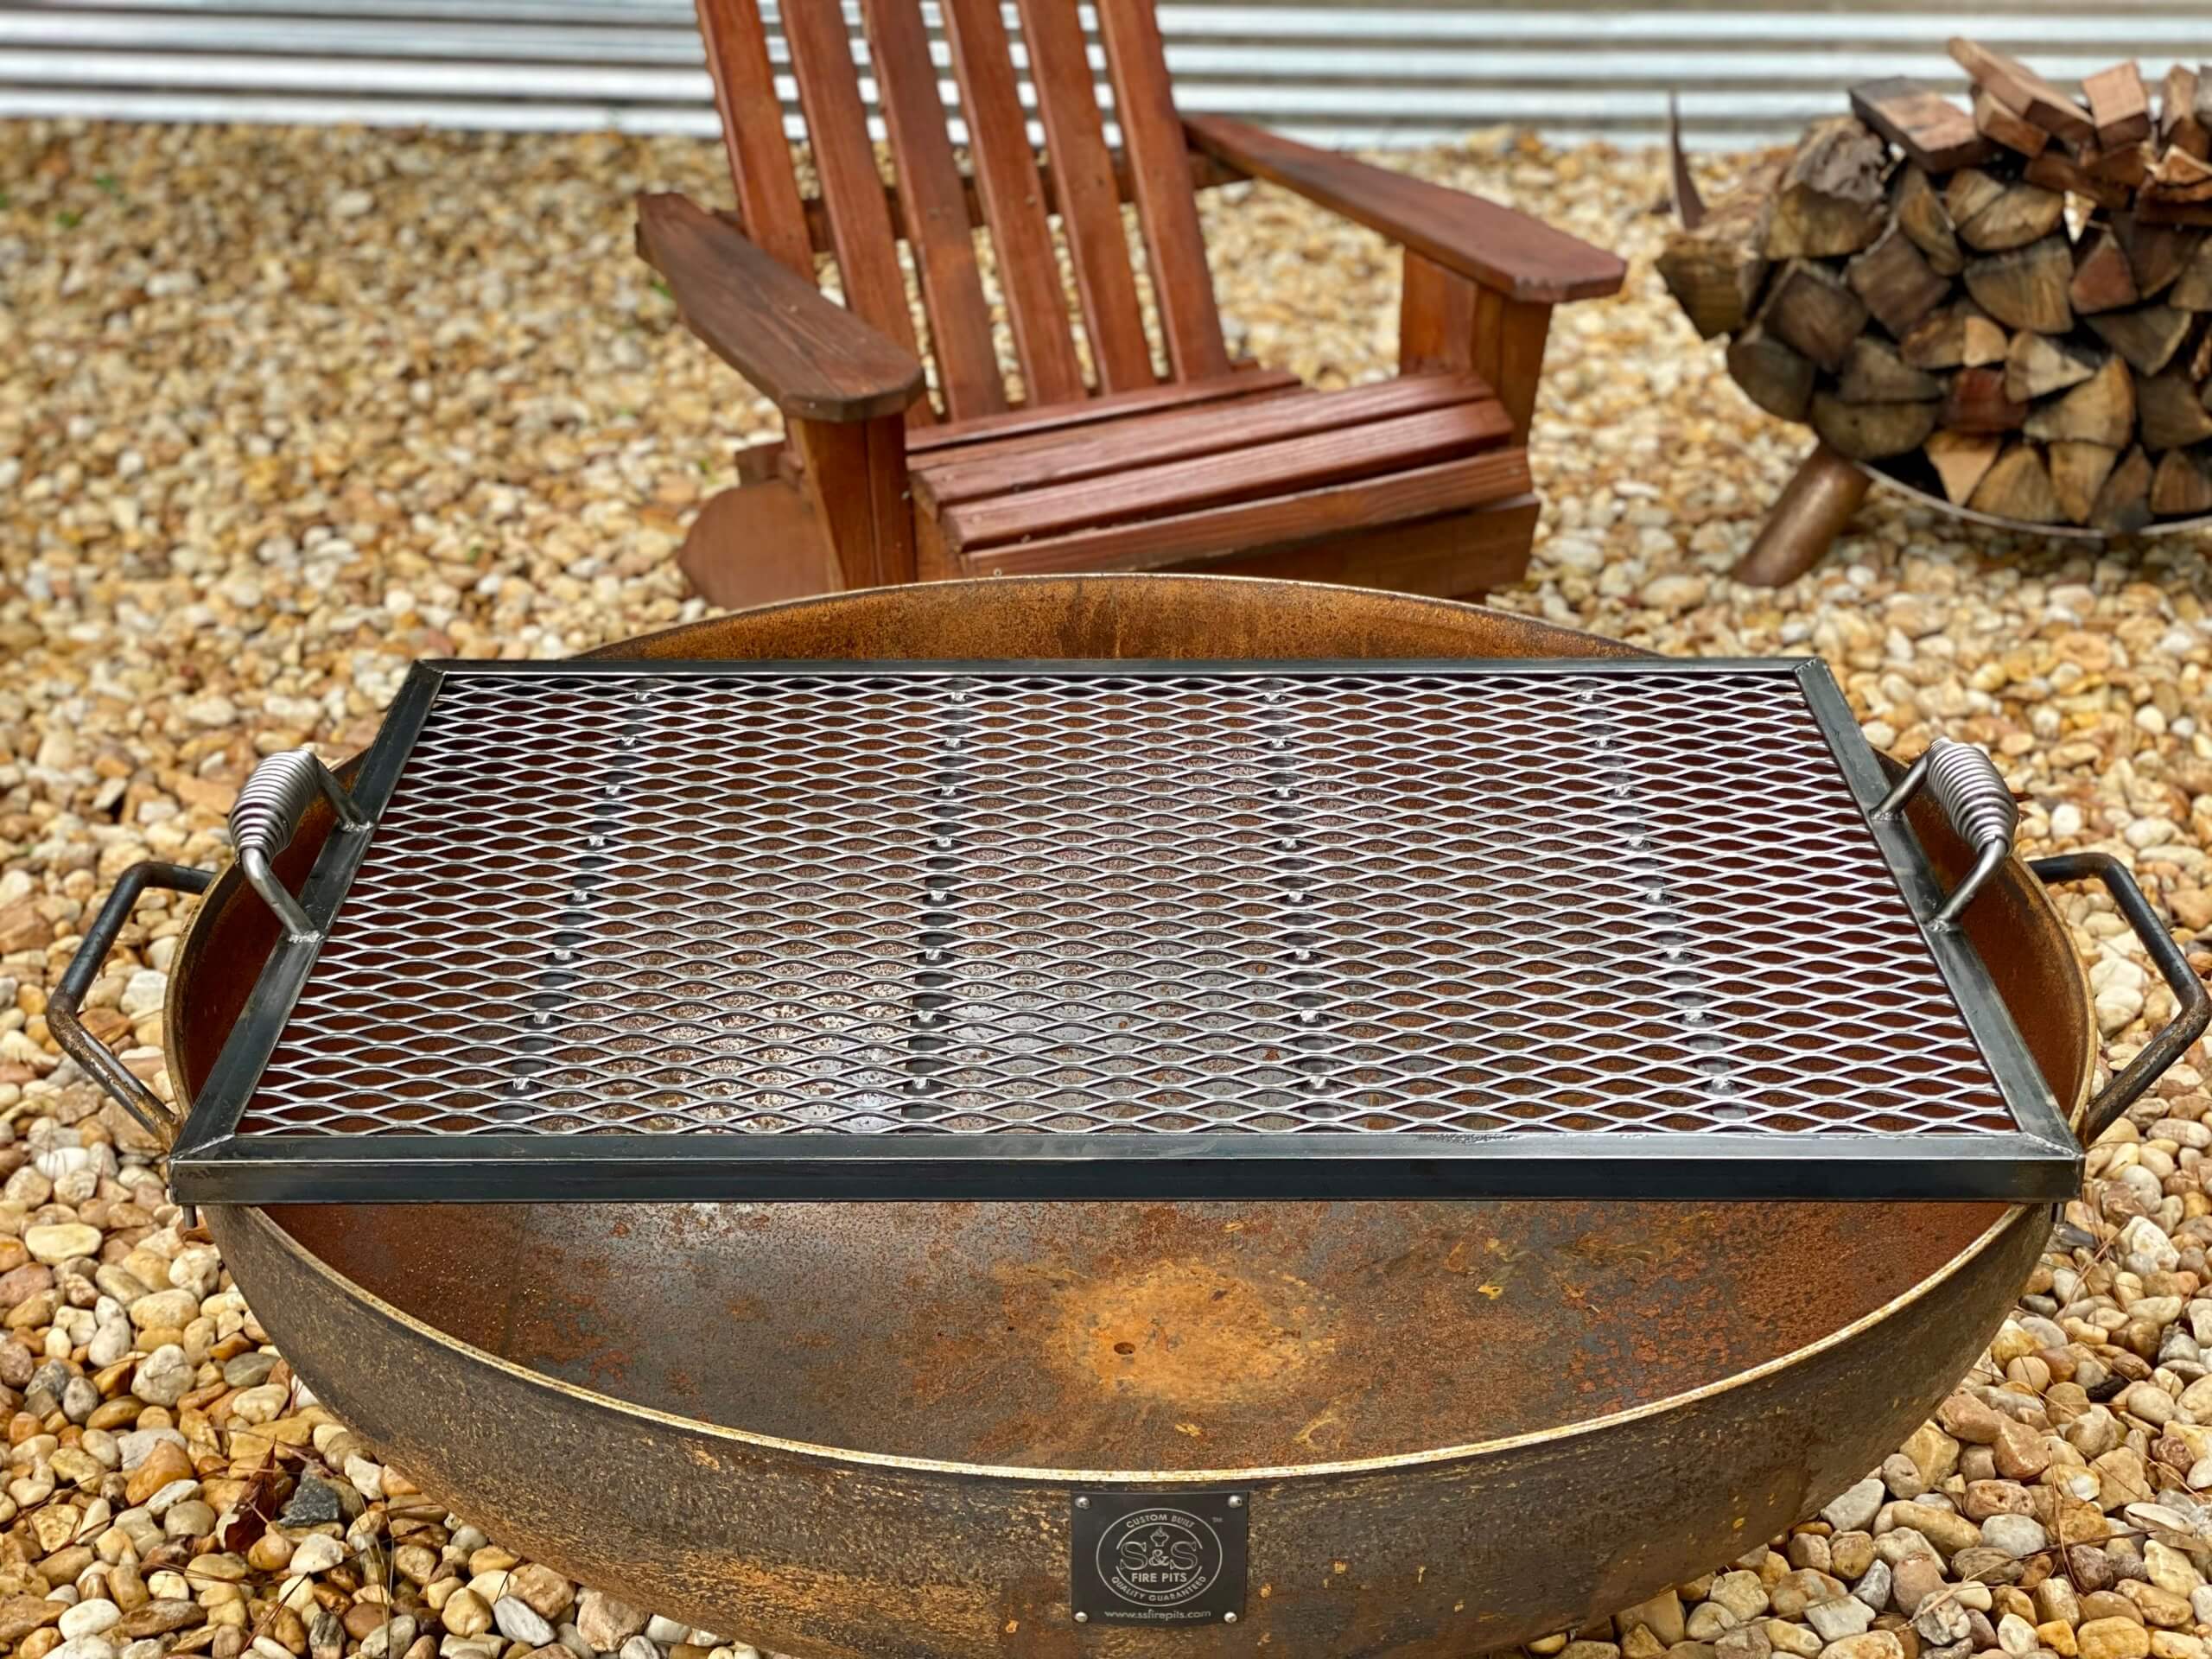 42 Fire Pit Cooking Grate Inch, Cooking Grates For Outdoor Fire Pits